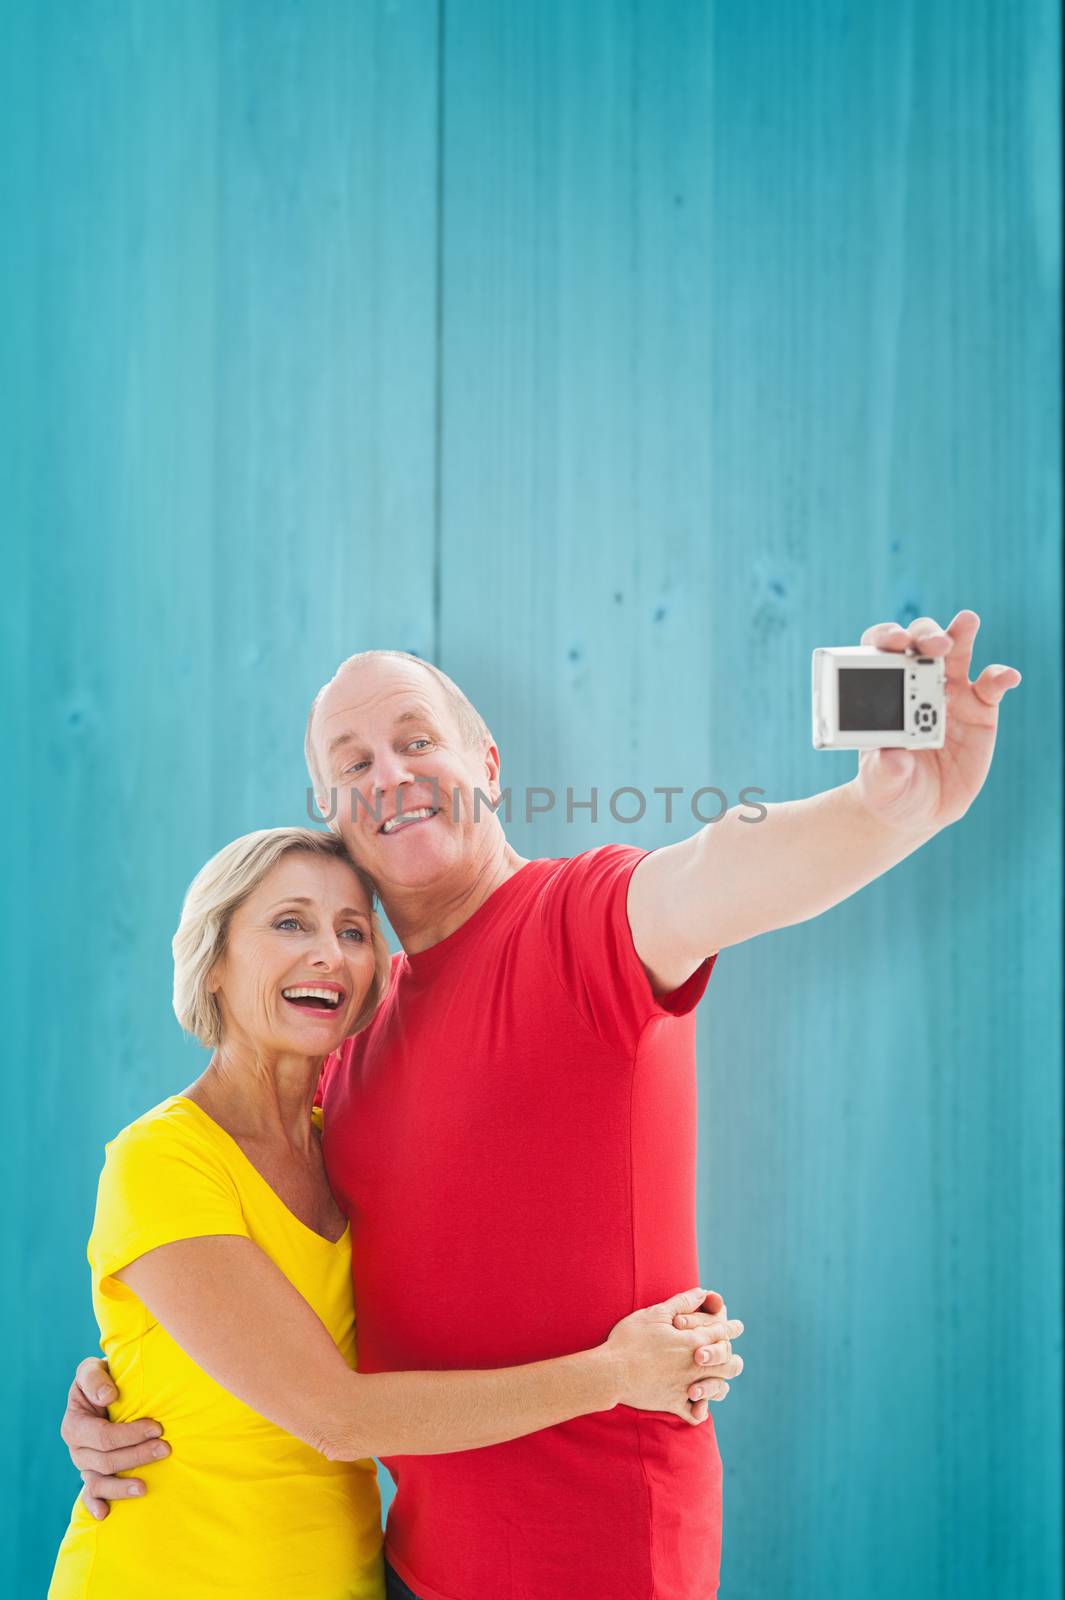 Composite image of happy mature couple taking a selfie together by Wavebreakmedia